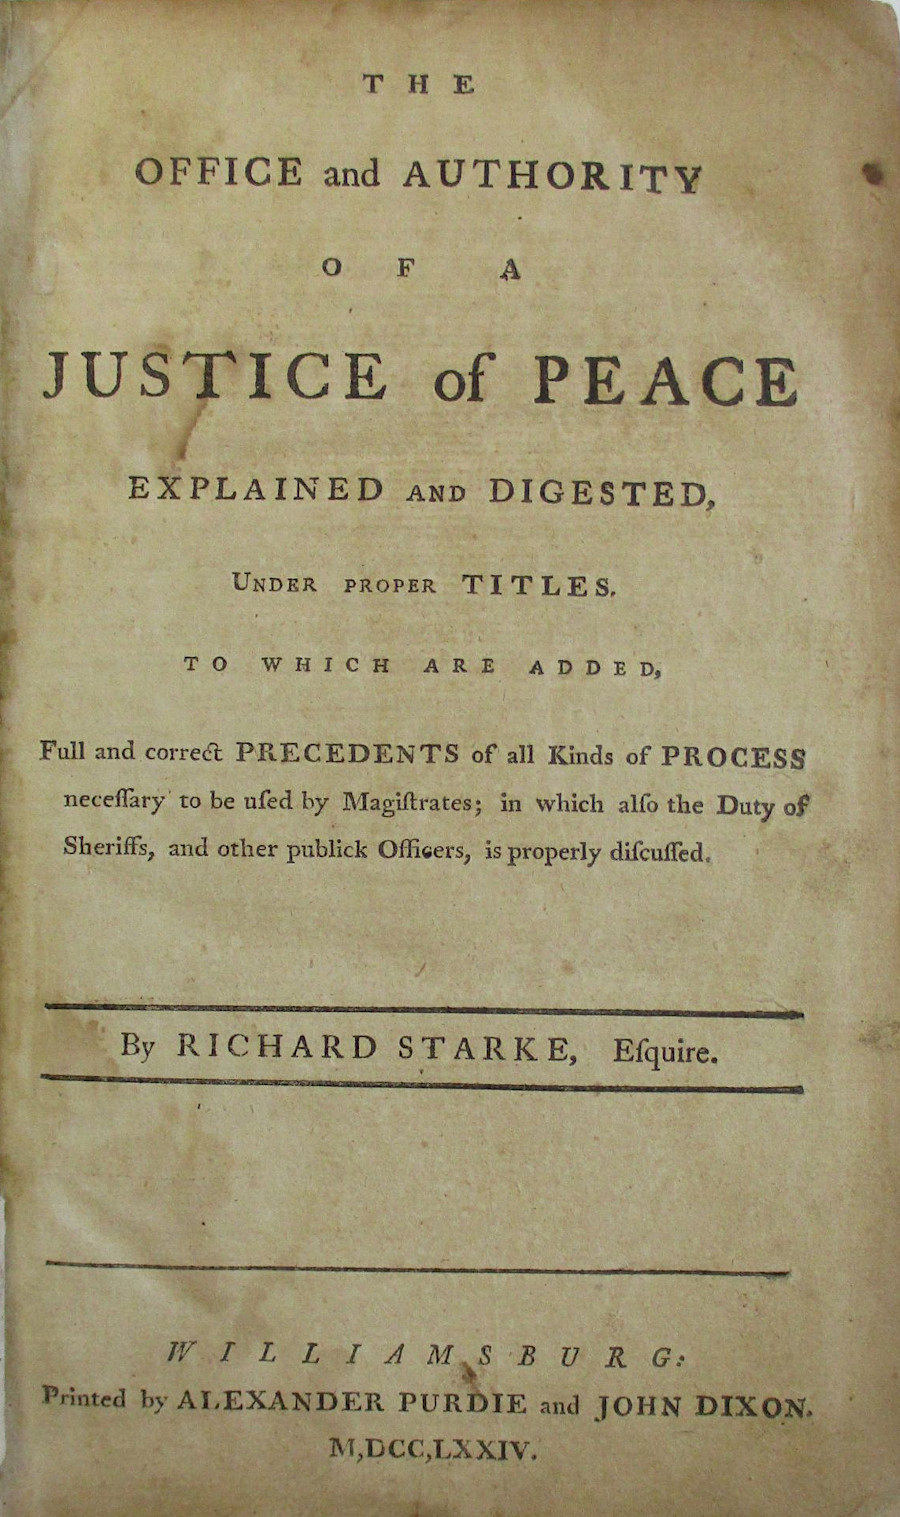 the second book intended for use by lawyers and justices of the peace in Virginia's county courts was published in 1774